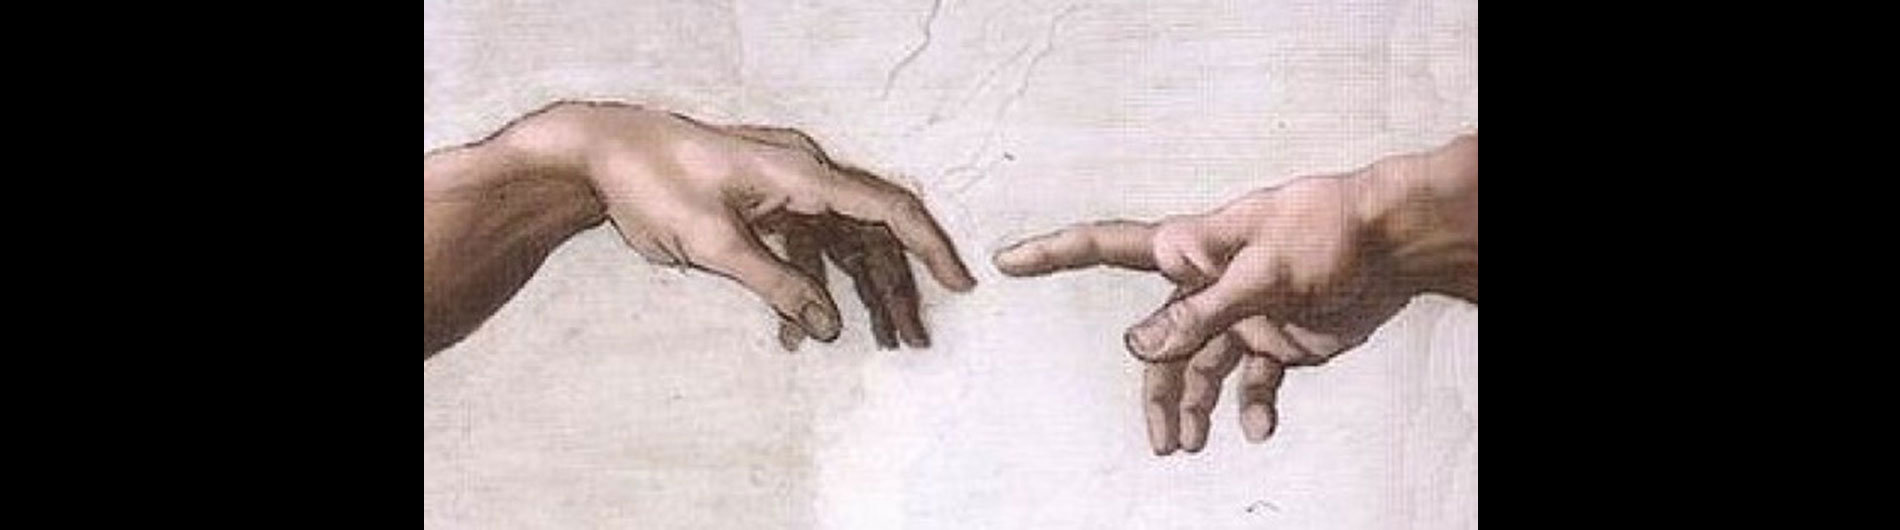 Image of two fingers about to touch